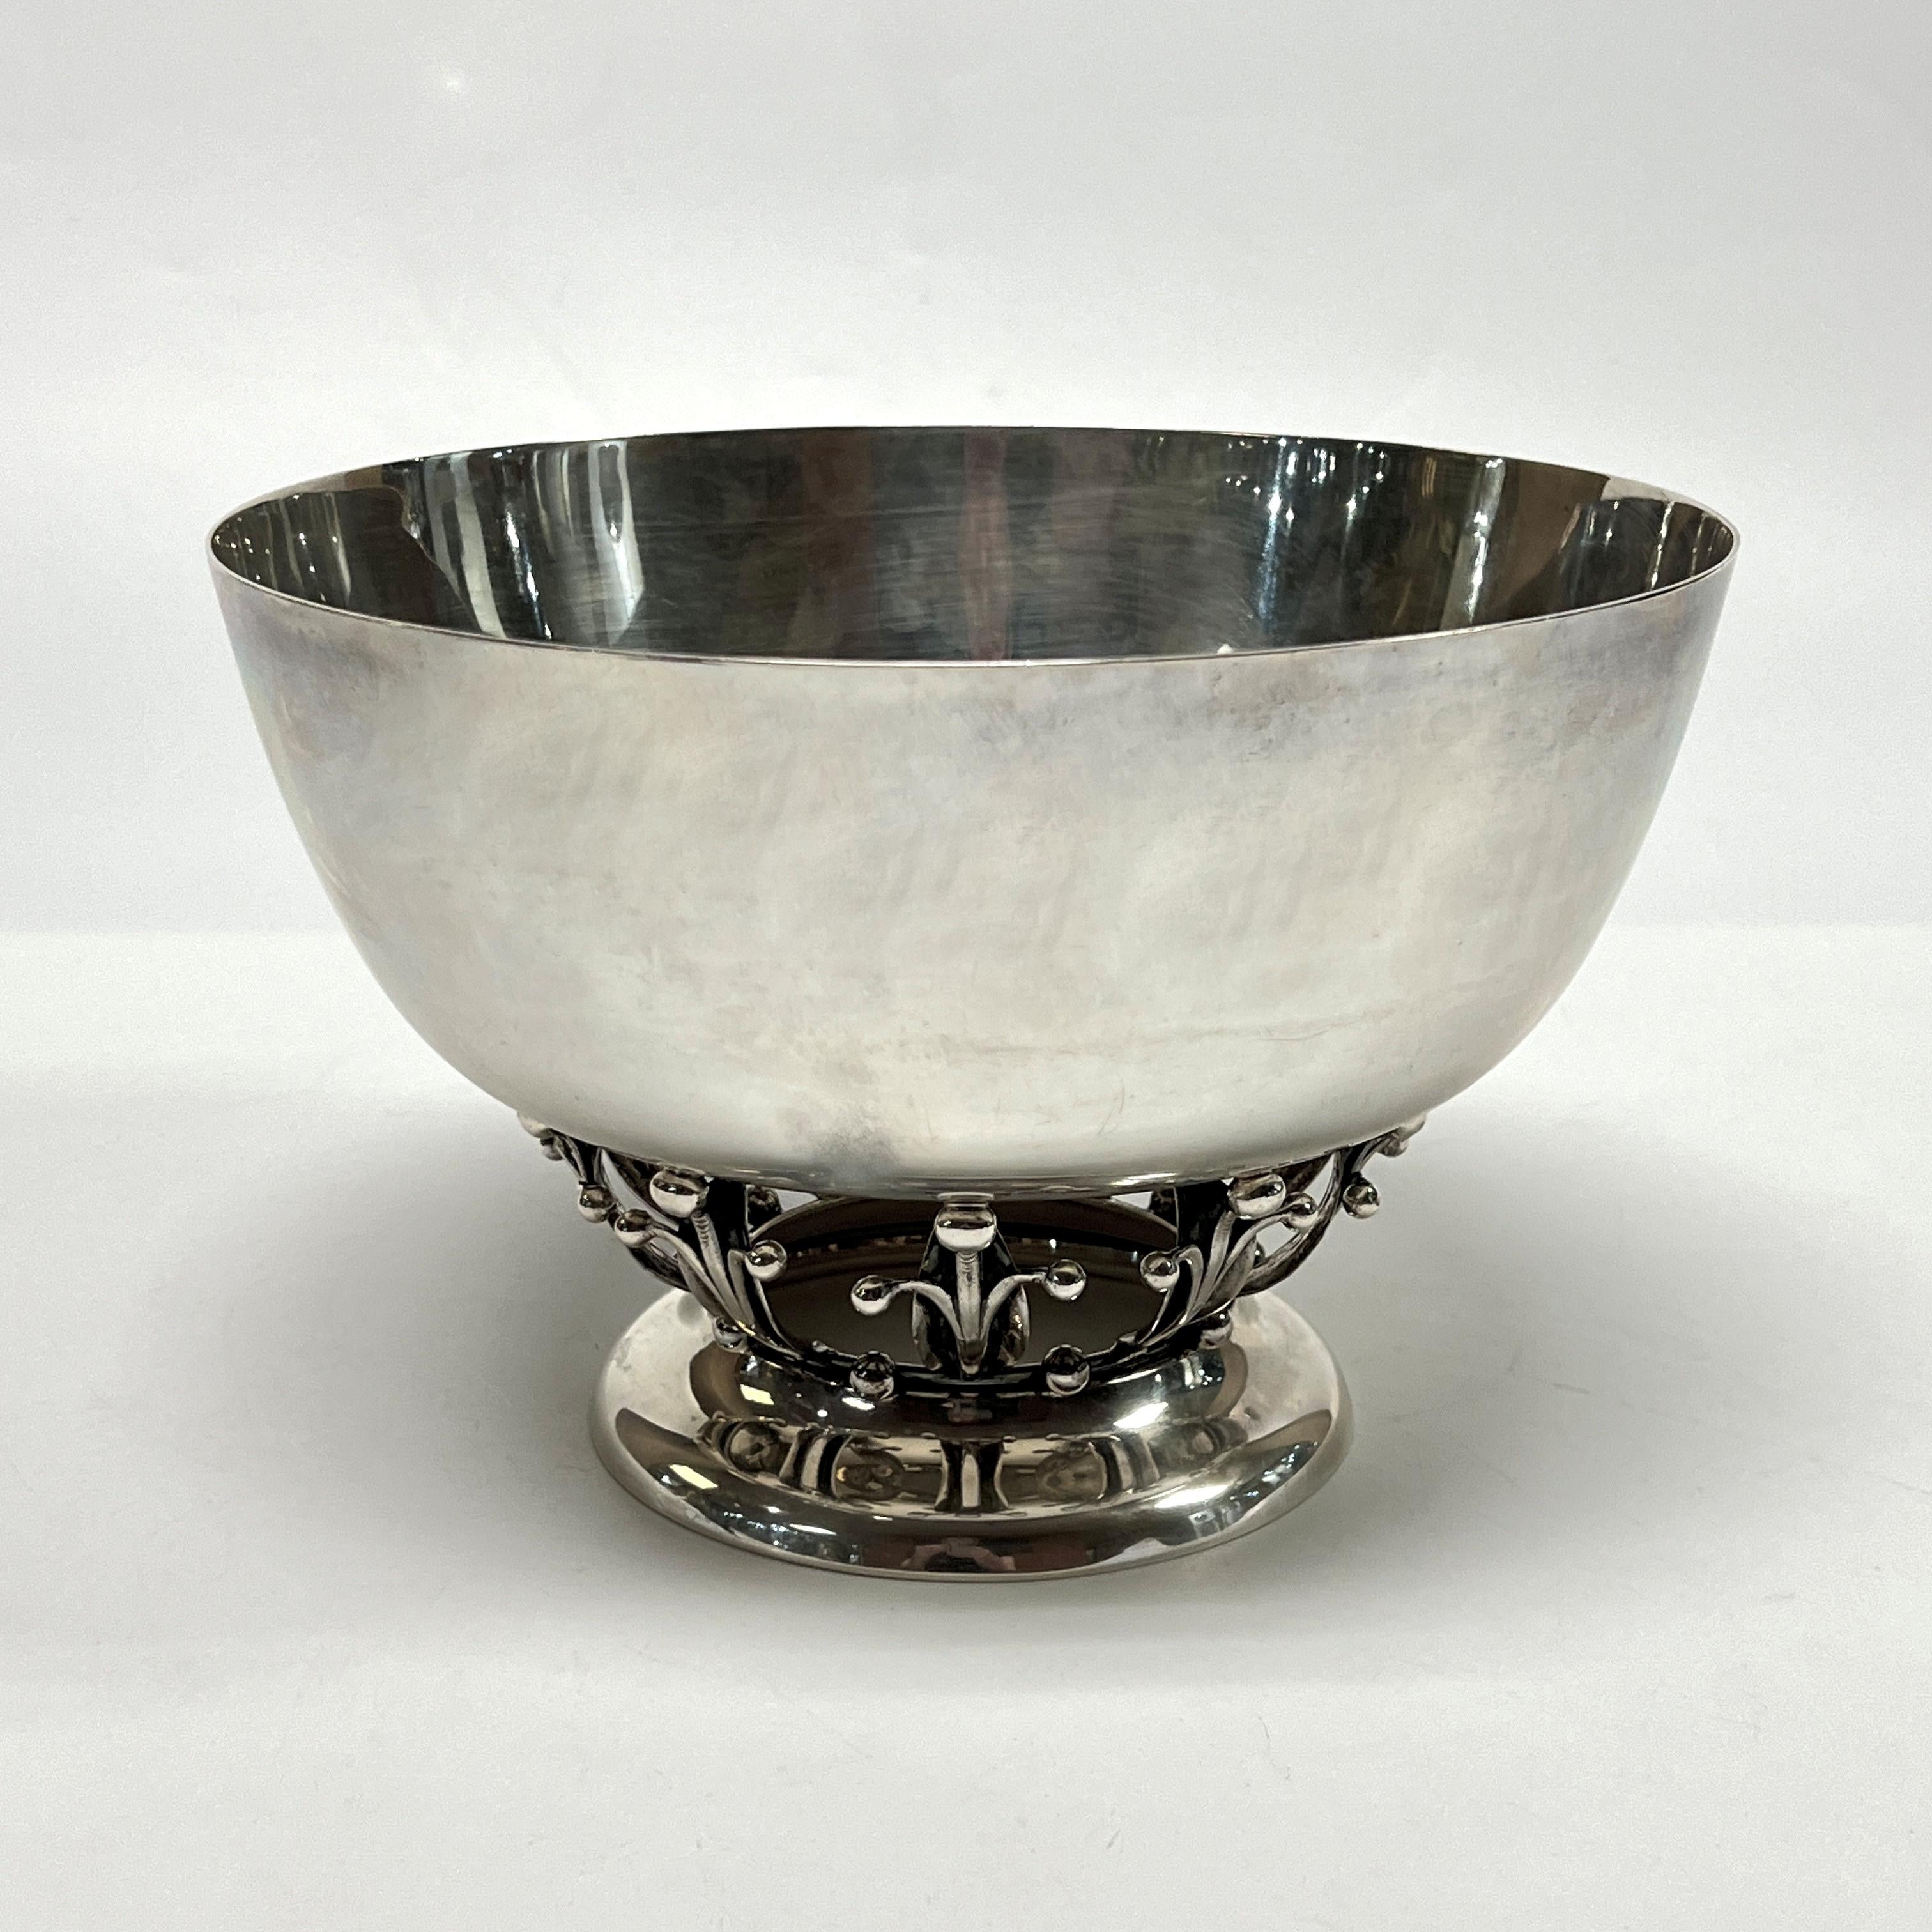 Lovely antique sterling silver bowl with berry and leaf stem in the style of the Danish maker, Georg Jensen, and made by the Woodside Sterling Company of New York City and Rhode Island, active 1896 through the mid-1920s.  In very good condition with